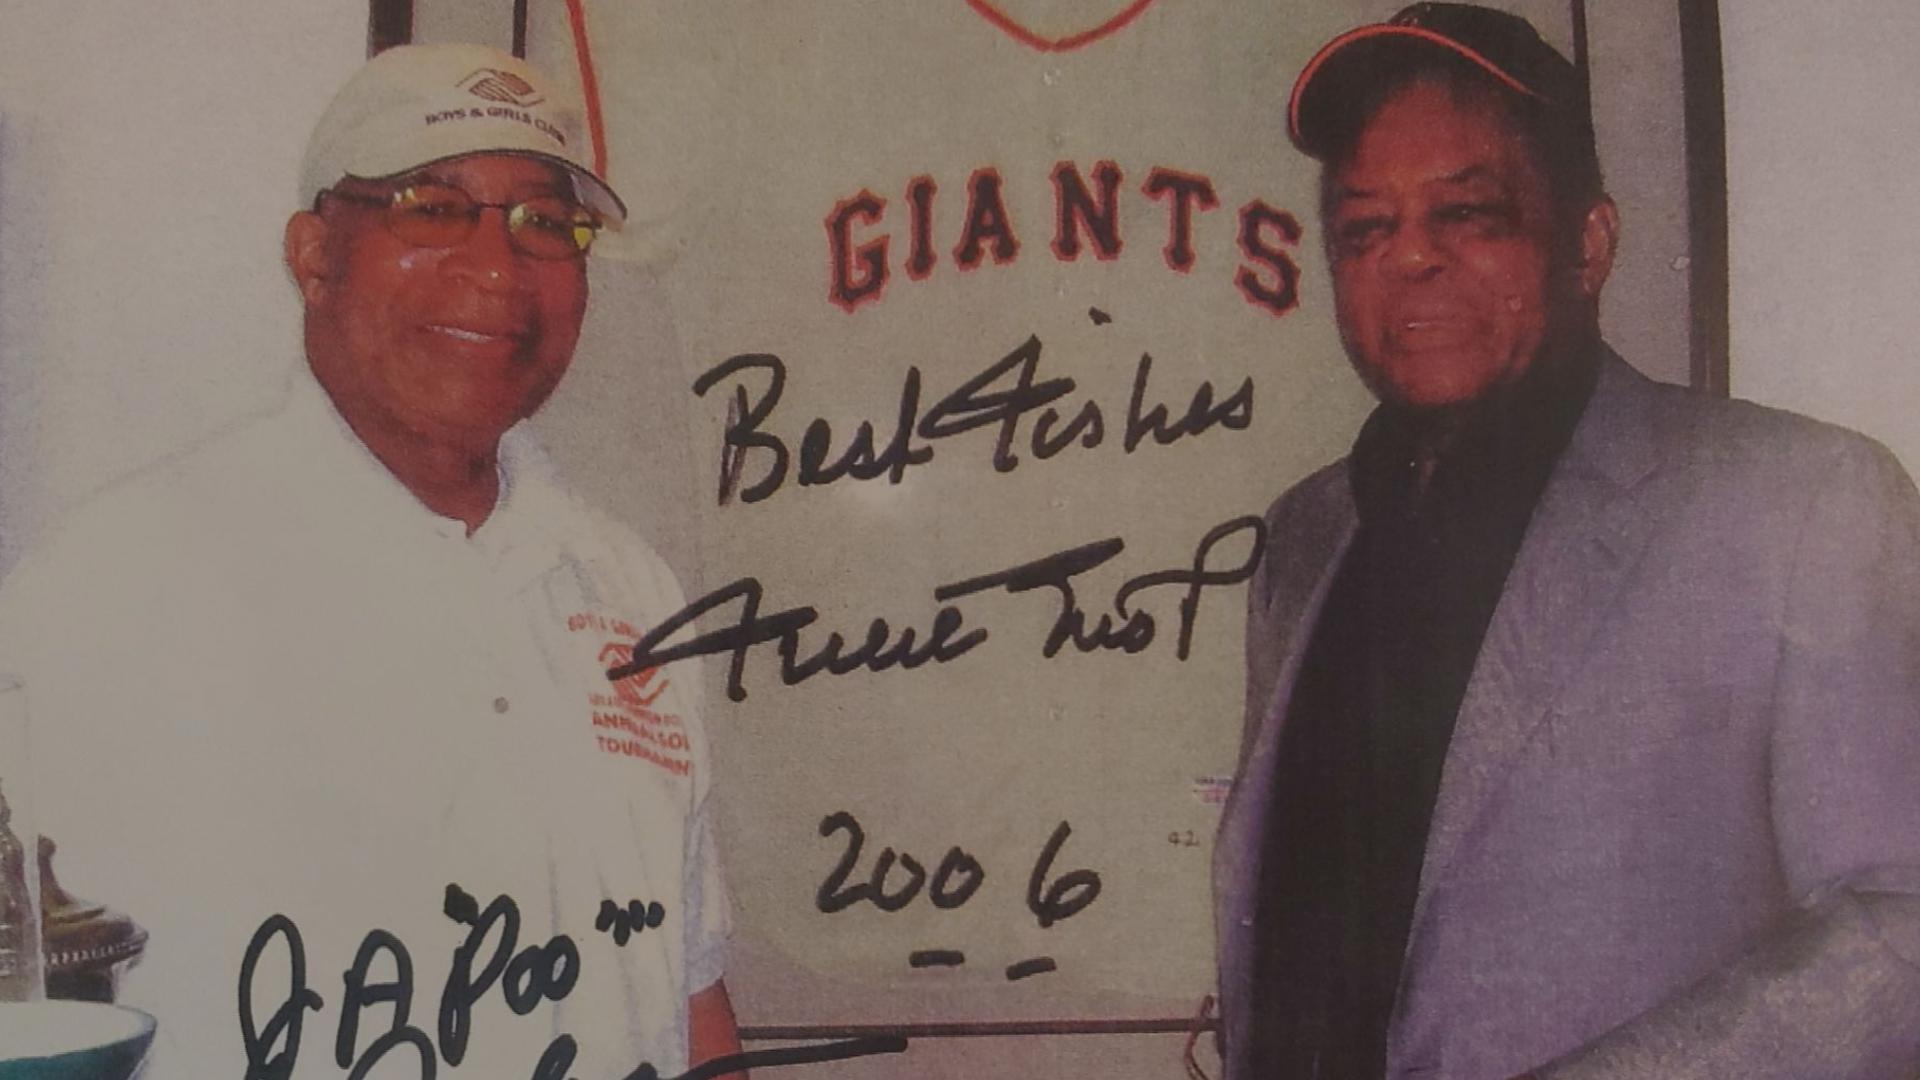 "Poo" Johnson and Willie Mays first met back in 1952 when Mays was in the U.S. Army during the Korean War. He was stationed at Fort Eustis.